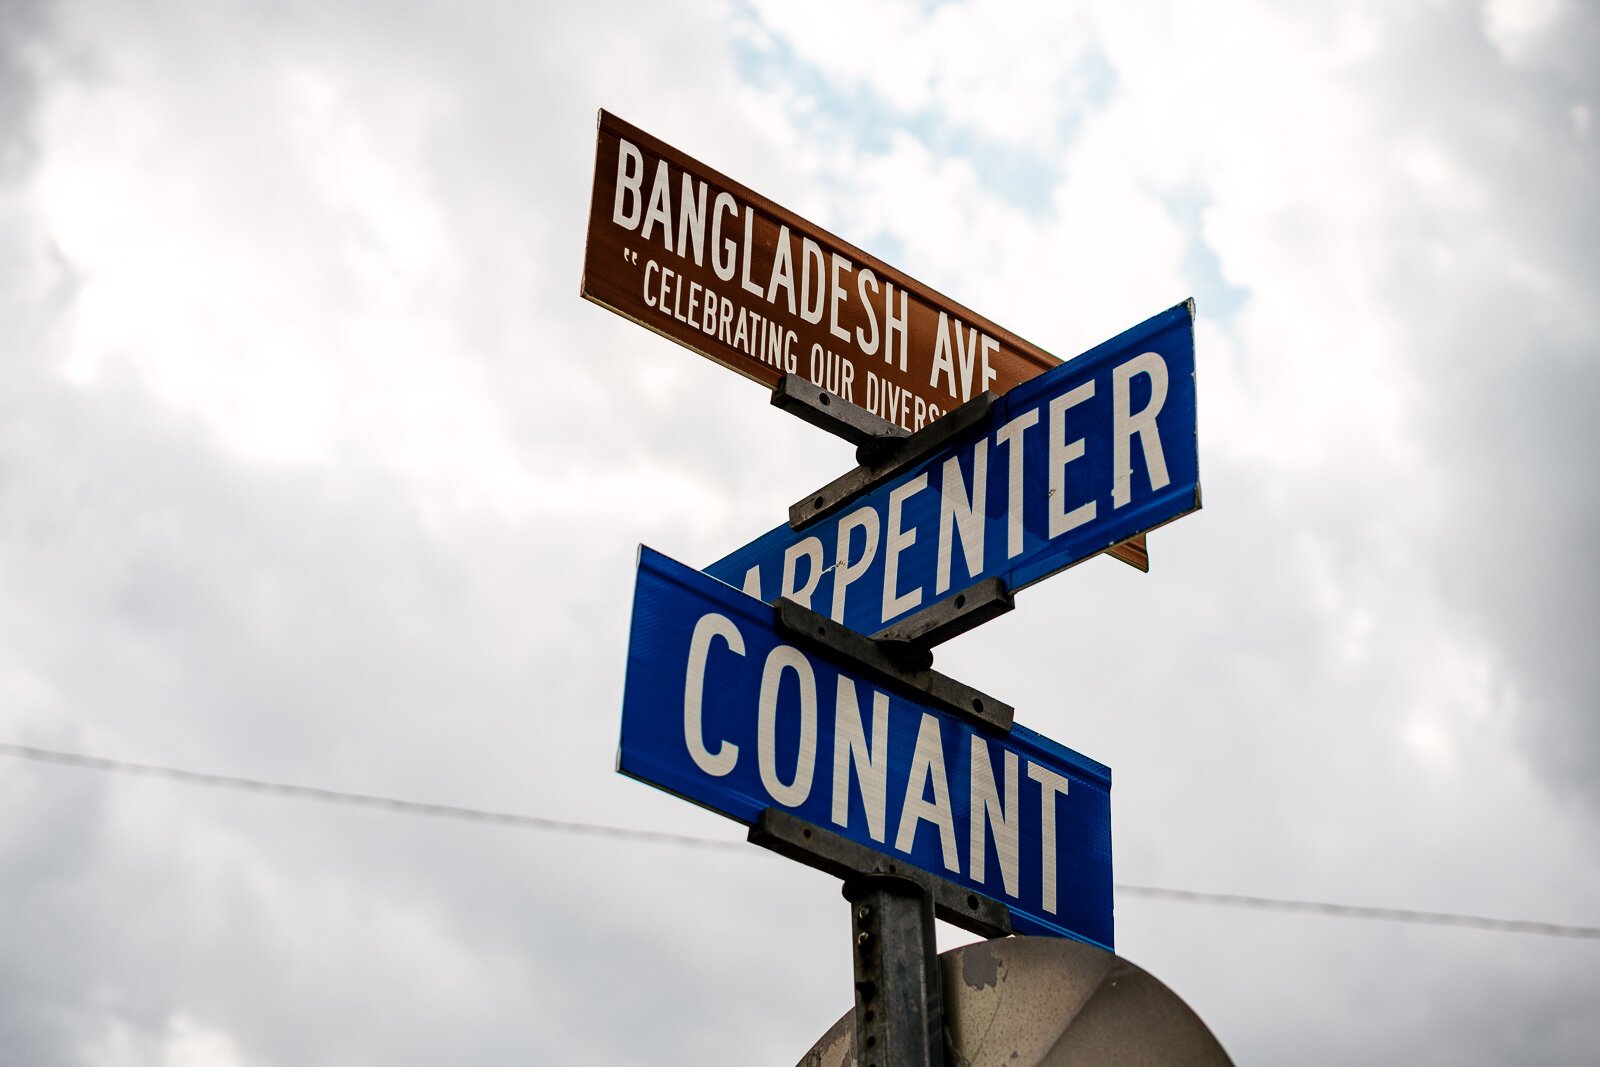 Conant acts as the main commercial corridor of Banglatown.